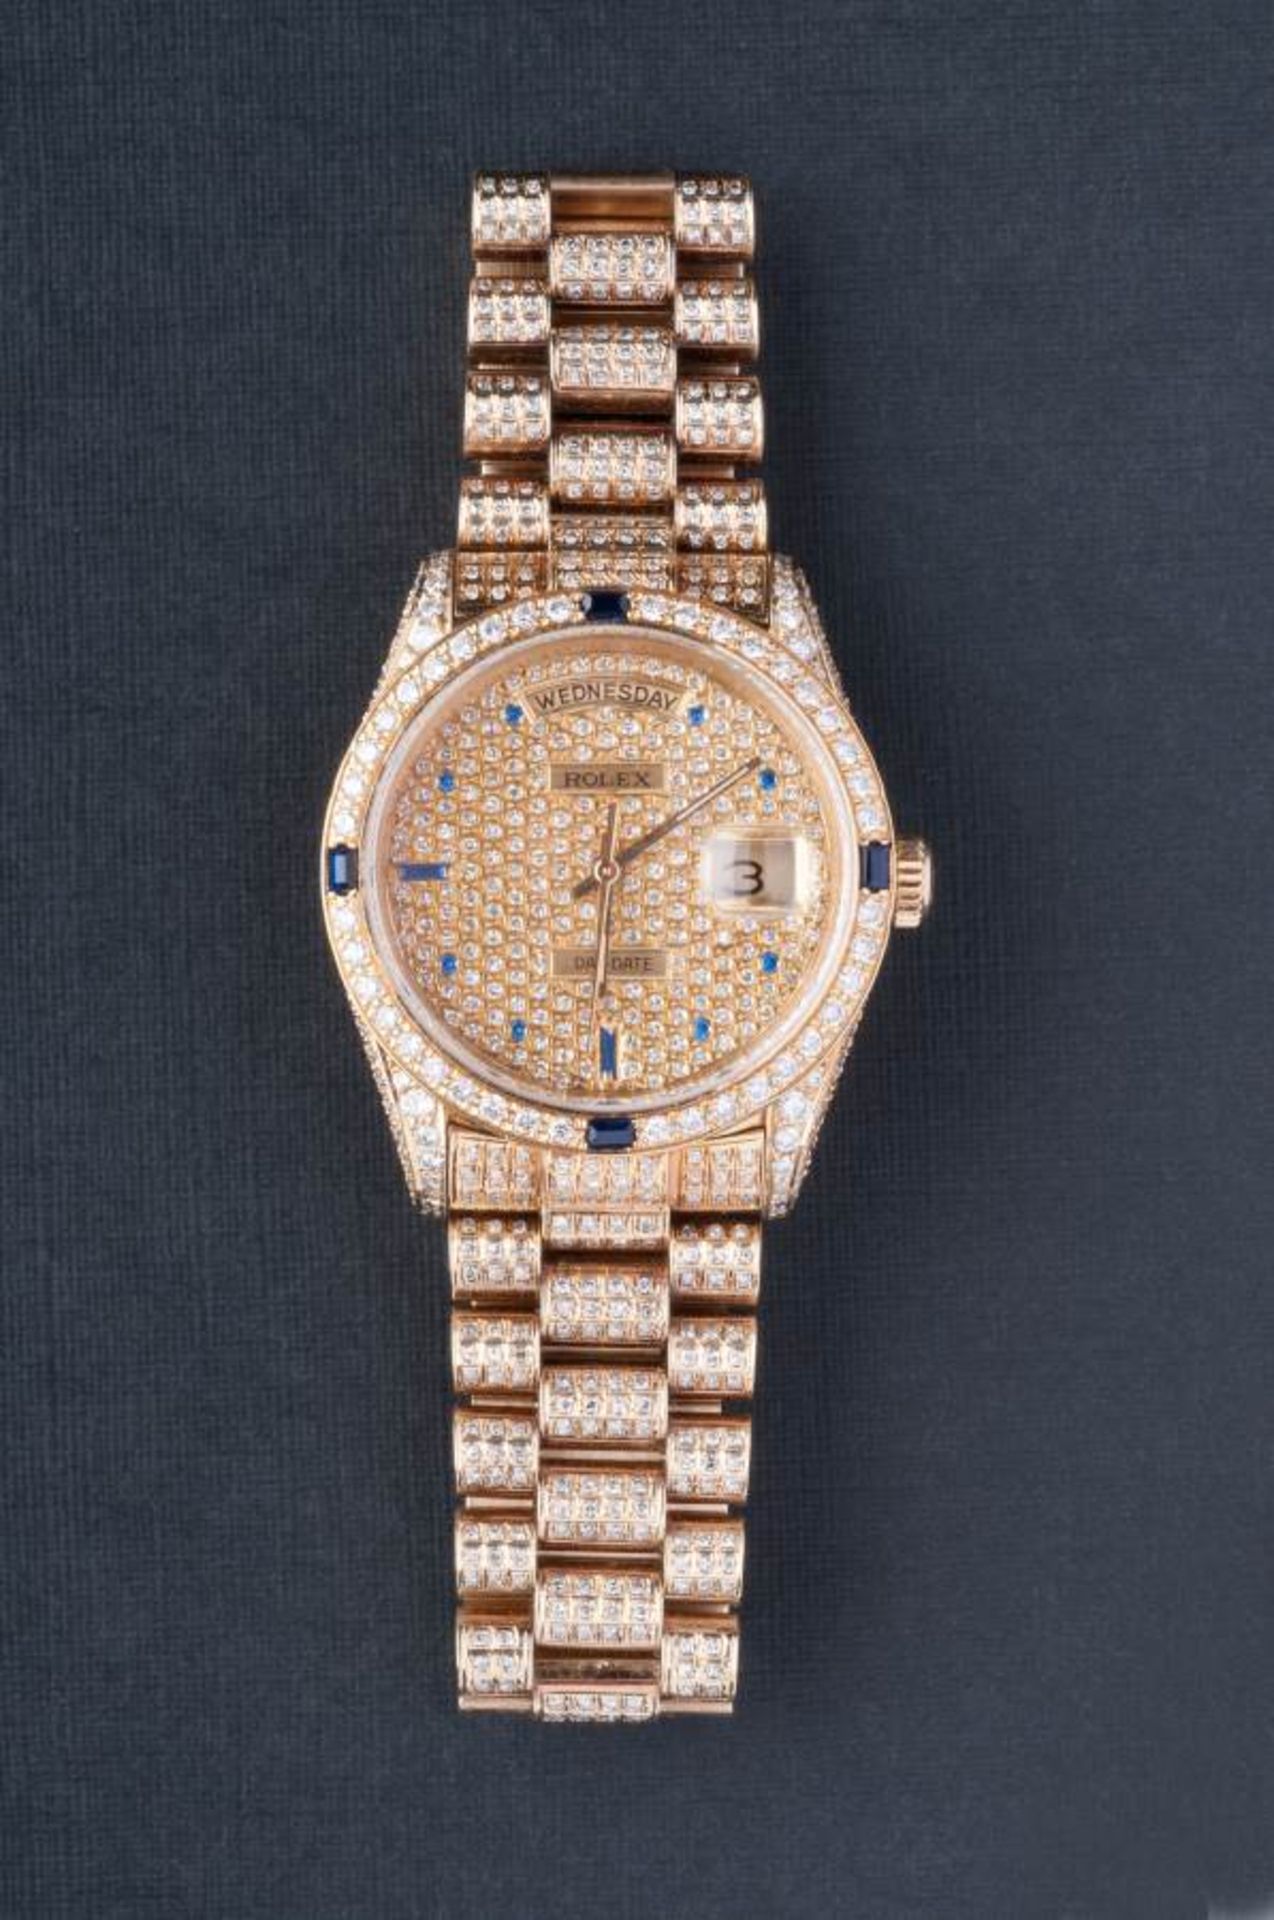 Stunning Gents 18ct Gold Rolex set with approx 10.5 Carats of Diamonds